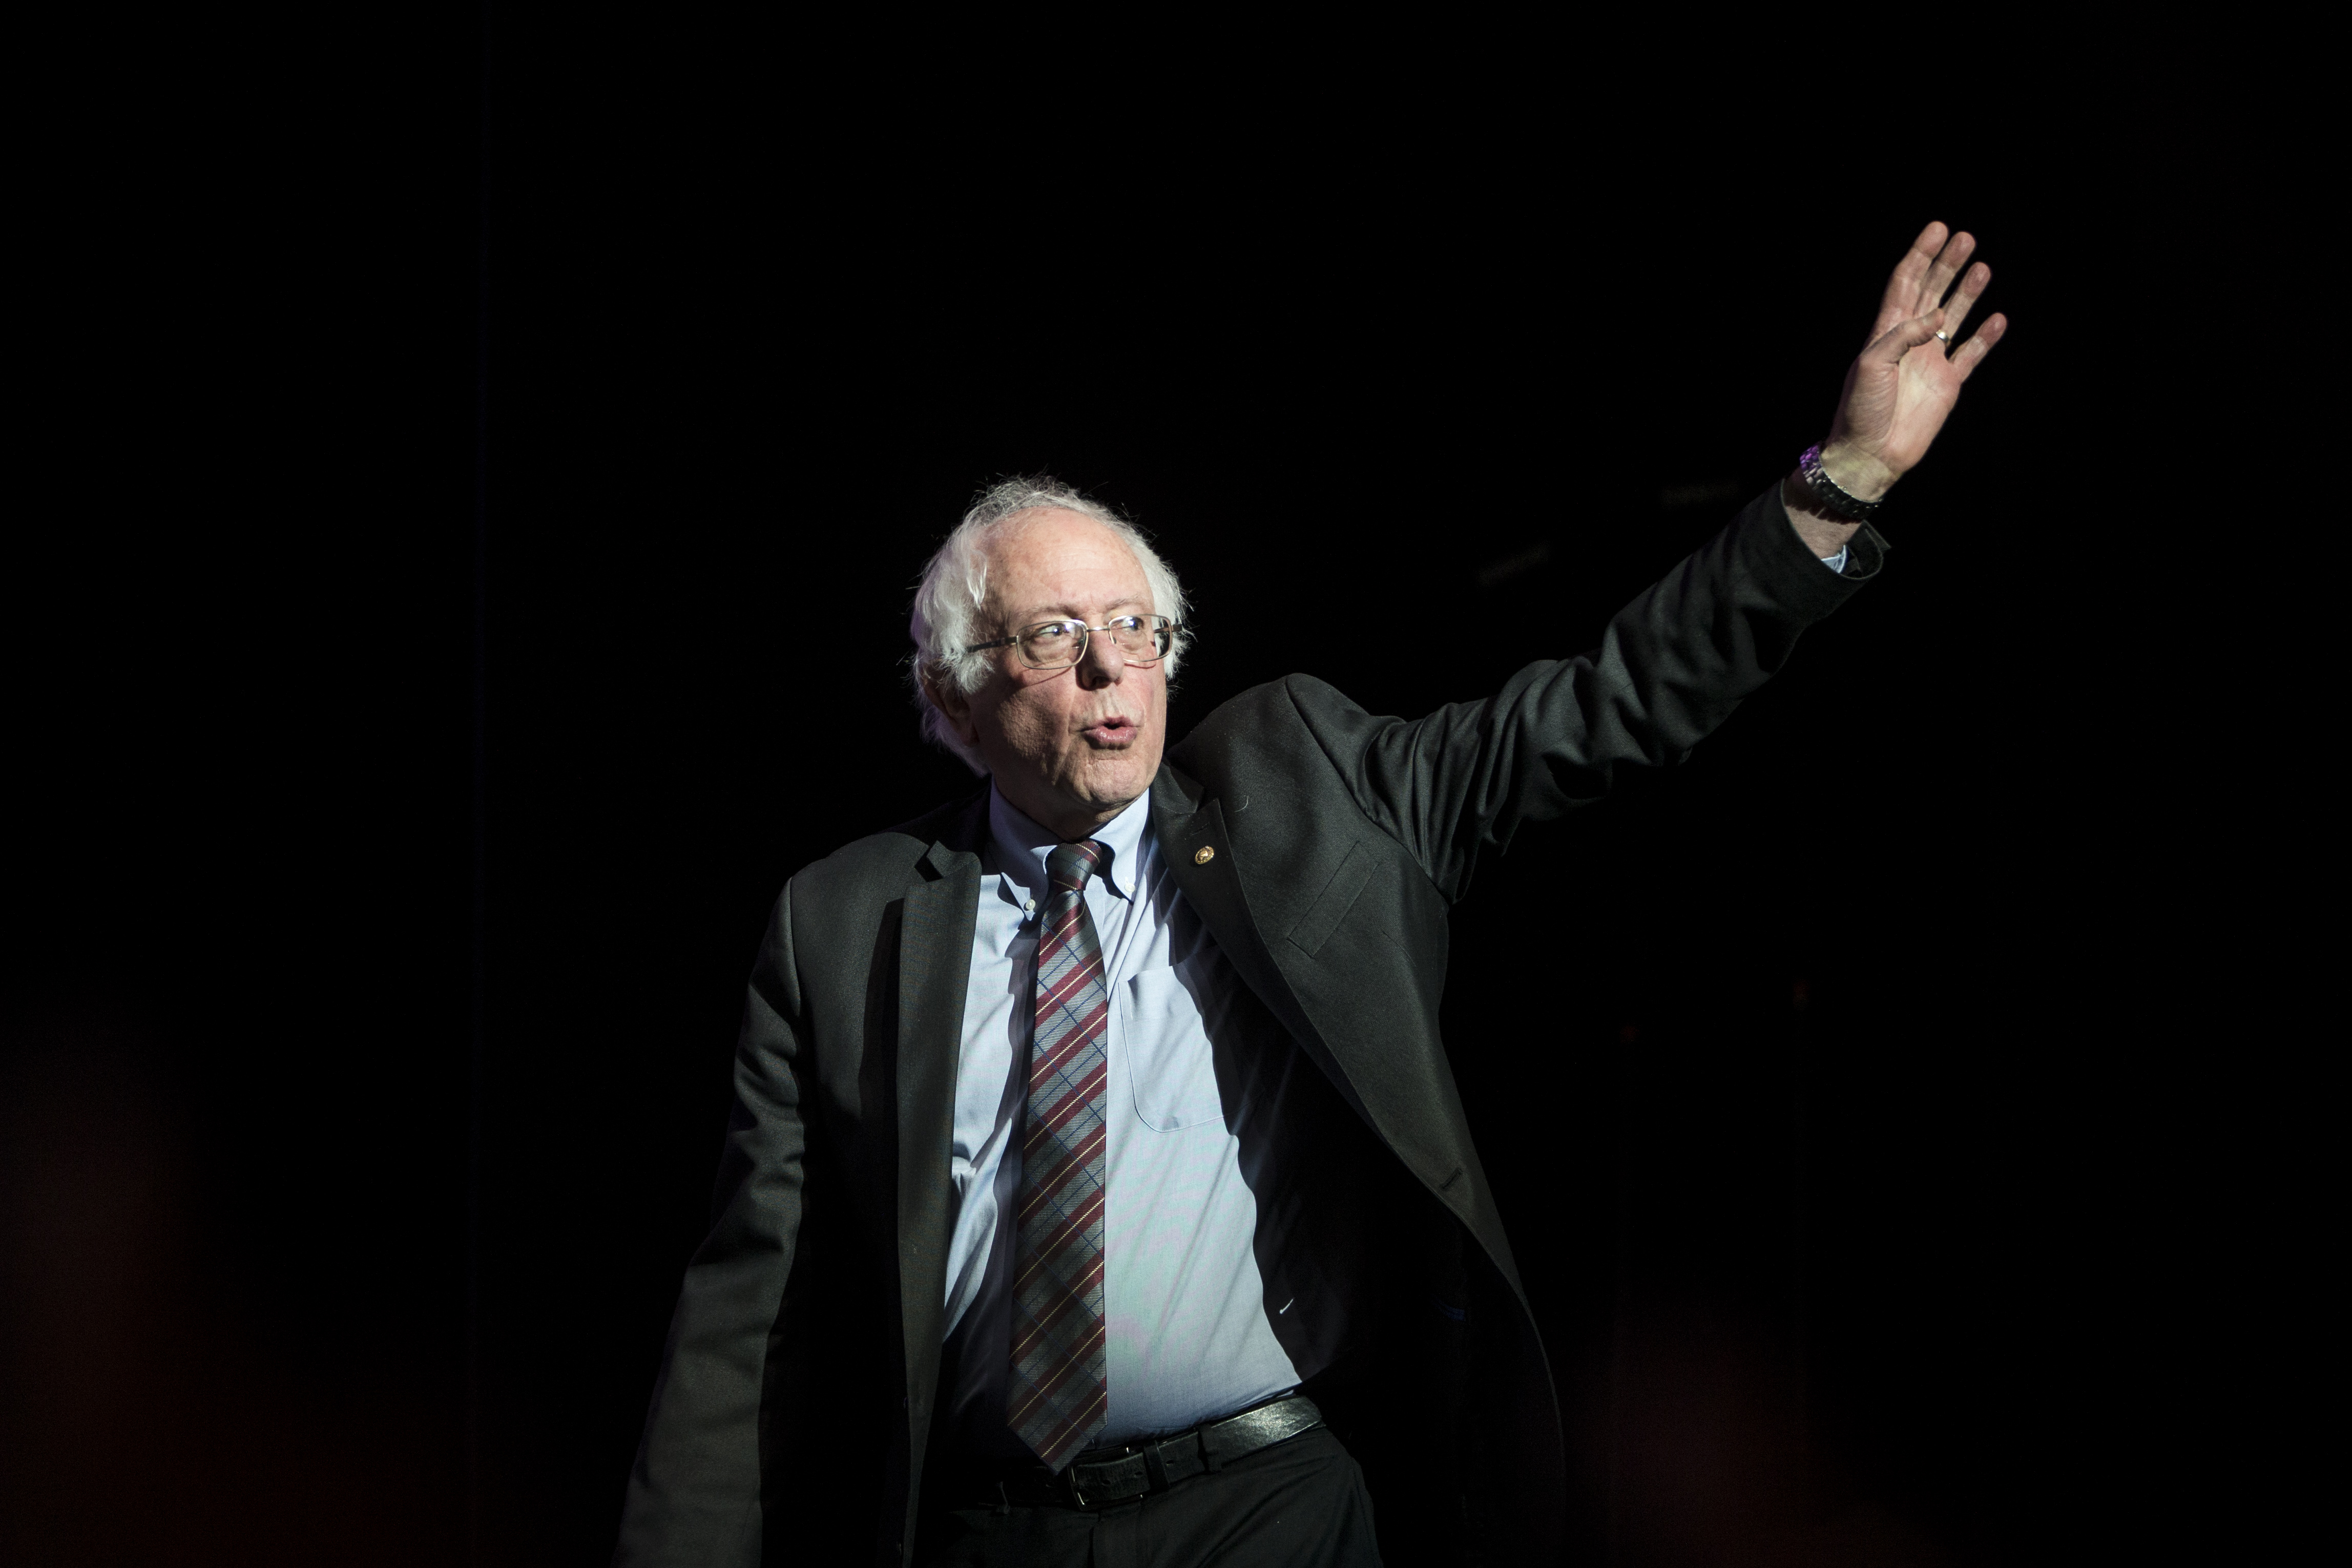 Former Presidential candidate Senator Bernie Sanders (I-VT) waves as he takes the stage at the Our Revolution Massachusetts Rally at the Orpheum Theatre on March 31, 2017 in Boston, Massachusetts. Scott Eisen&mdash;Getty Images (Scott Eisen&mdash;Getty Images)